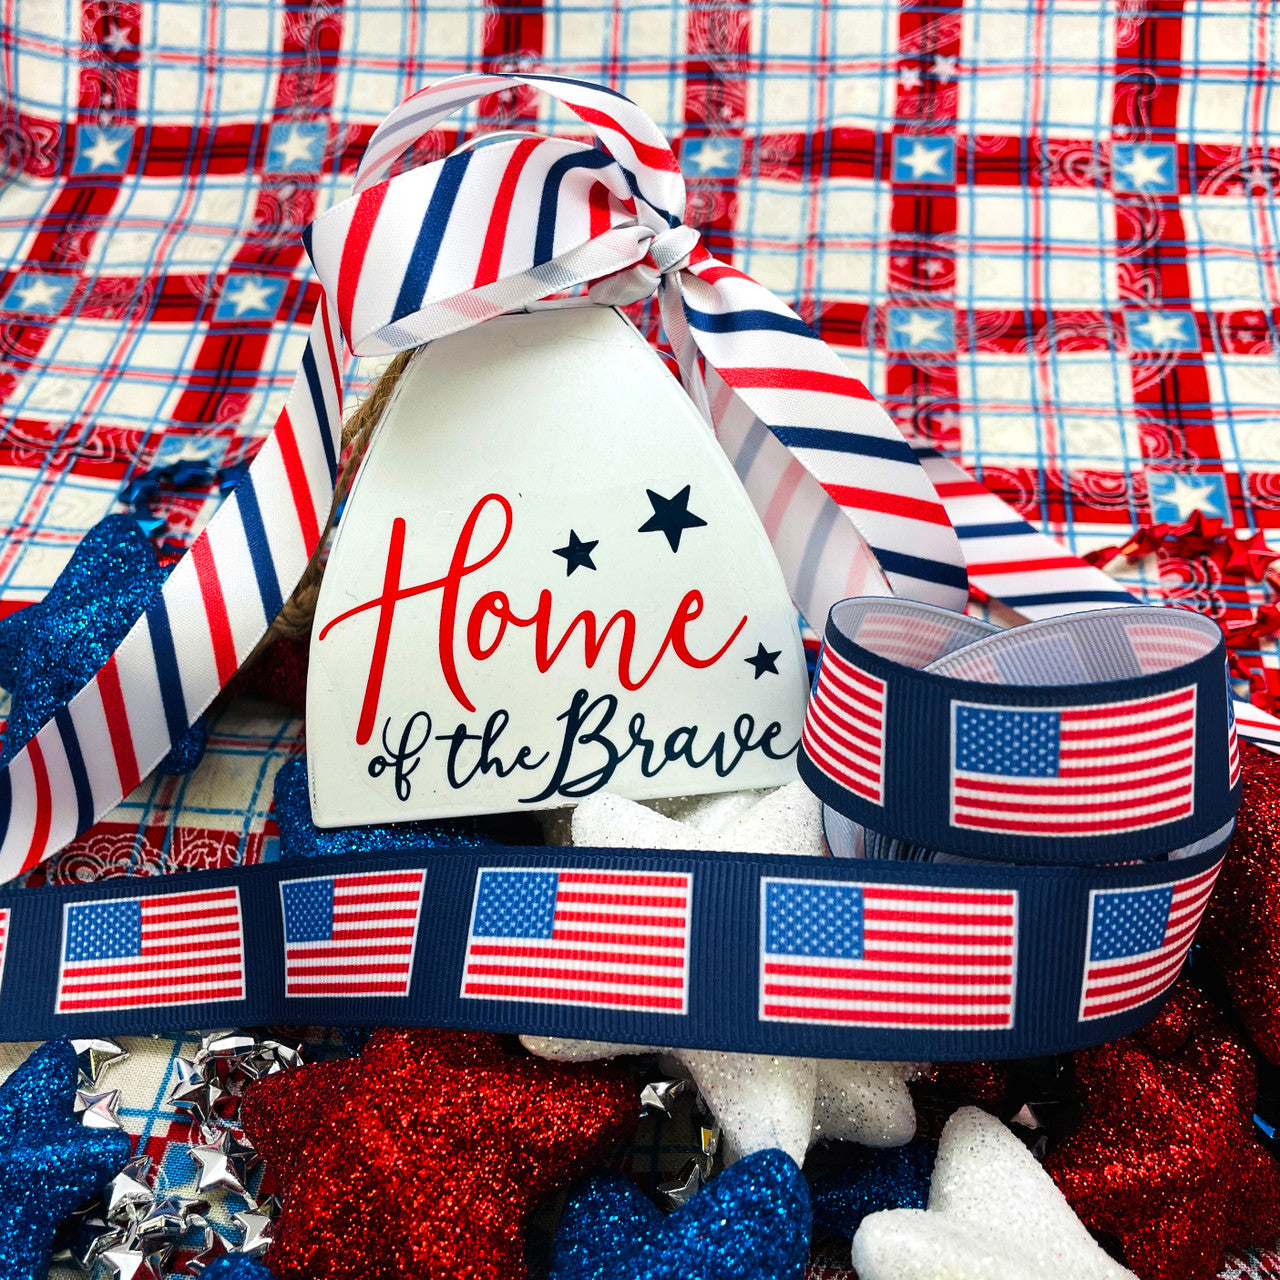 Celebrate and honor our country on Memorial Day, 4th of July, and Veterans Day with this patriotic American flag ribbon!